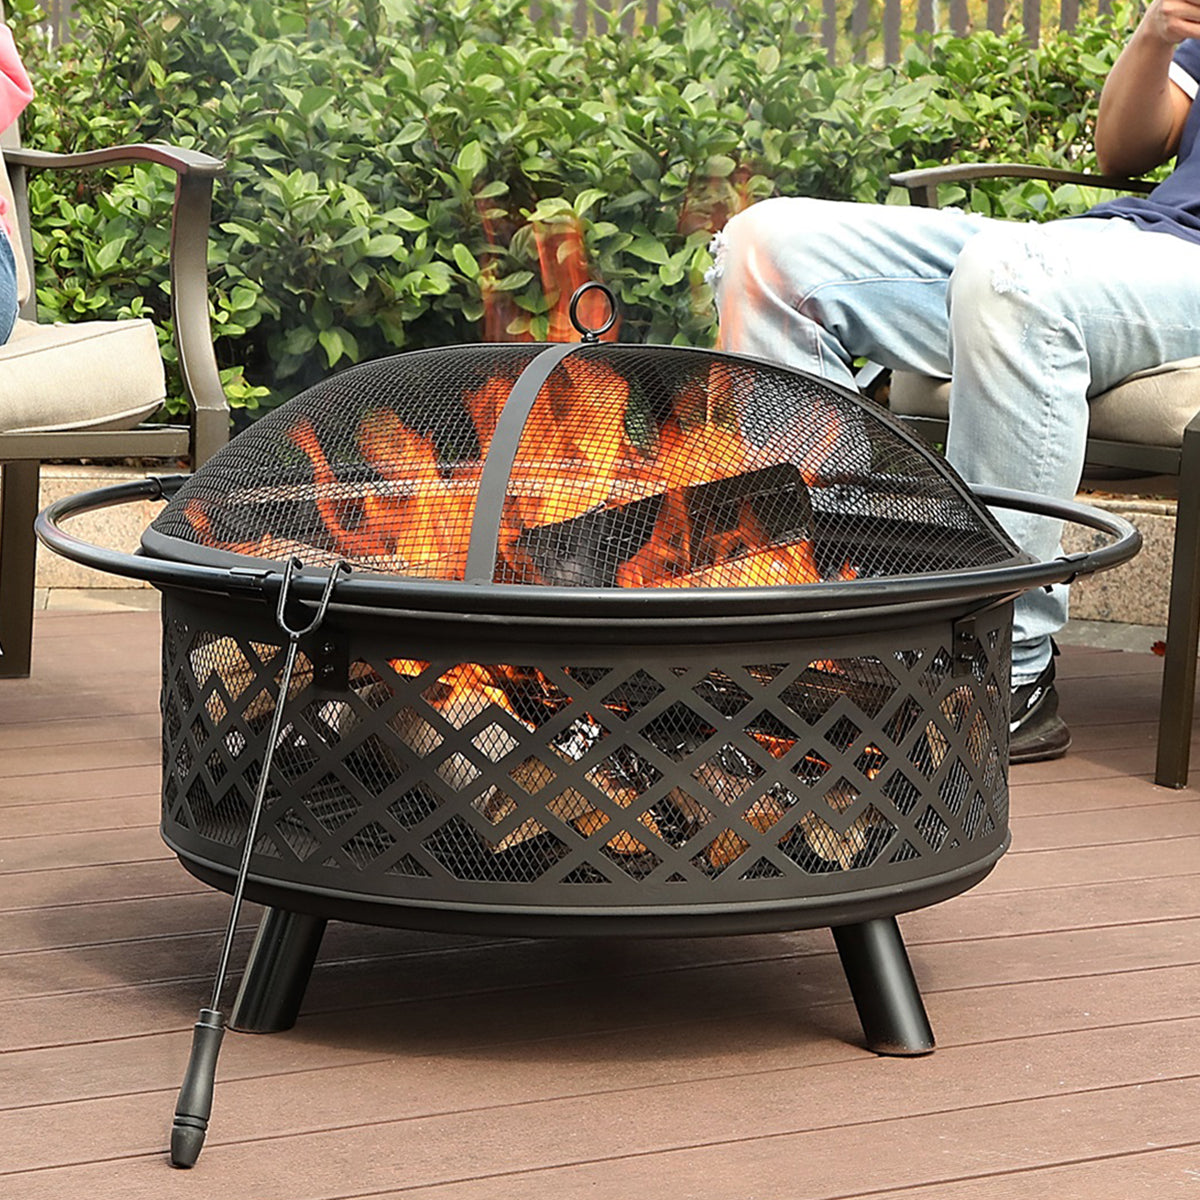 Sophia & William 32" Outdoor Steel Fire Pit Wood Burning Bronze Finish Fireplace